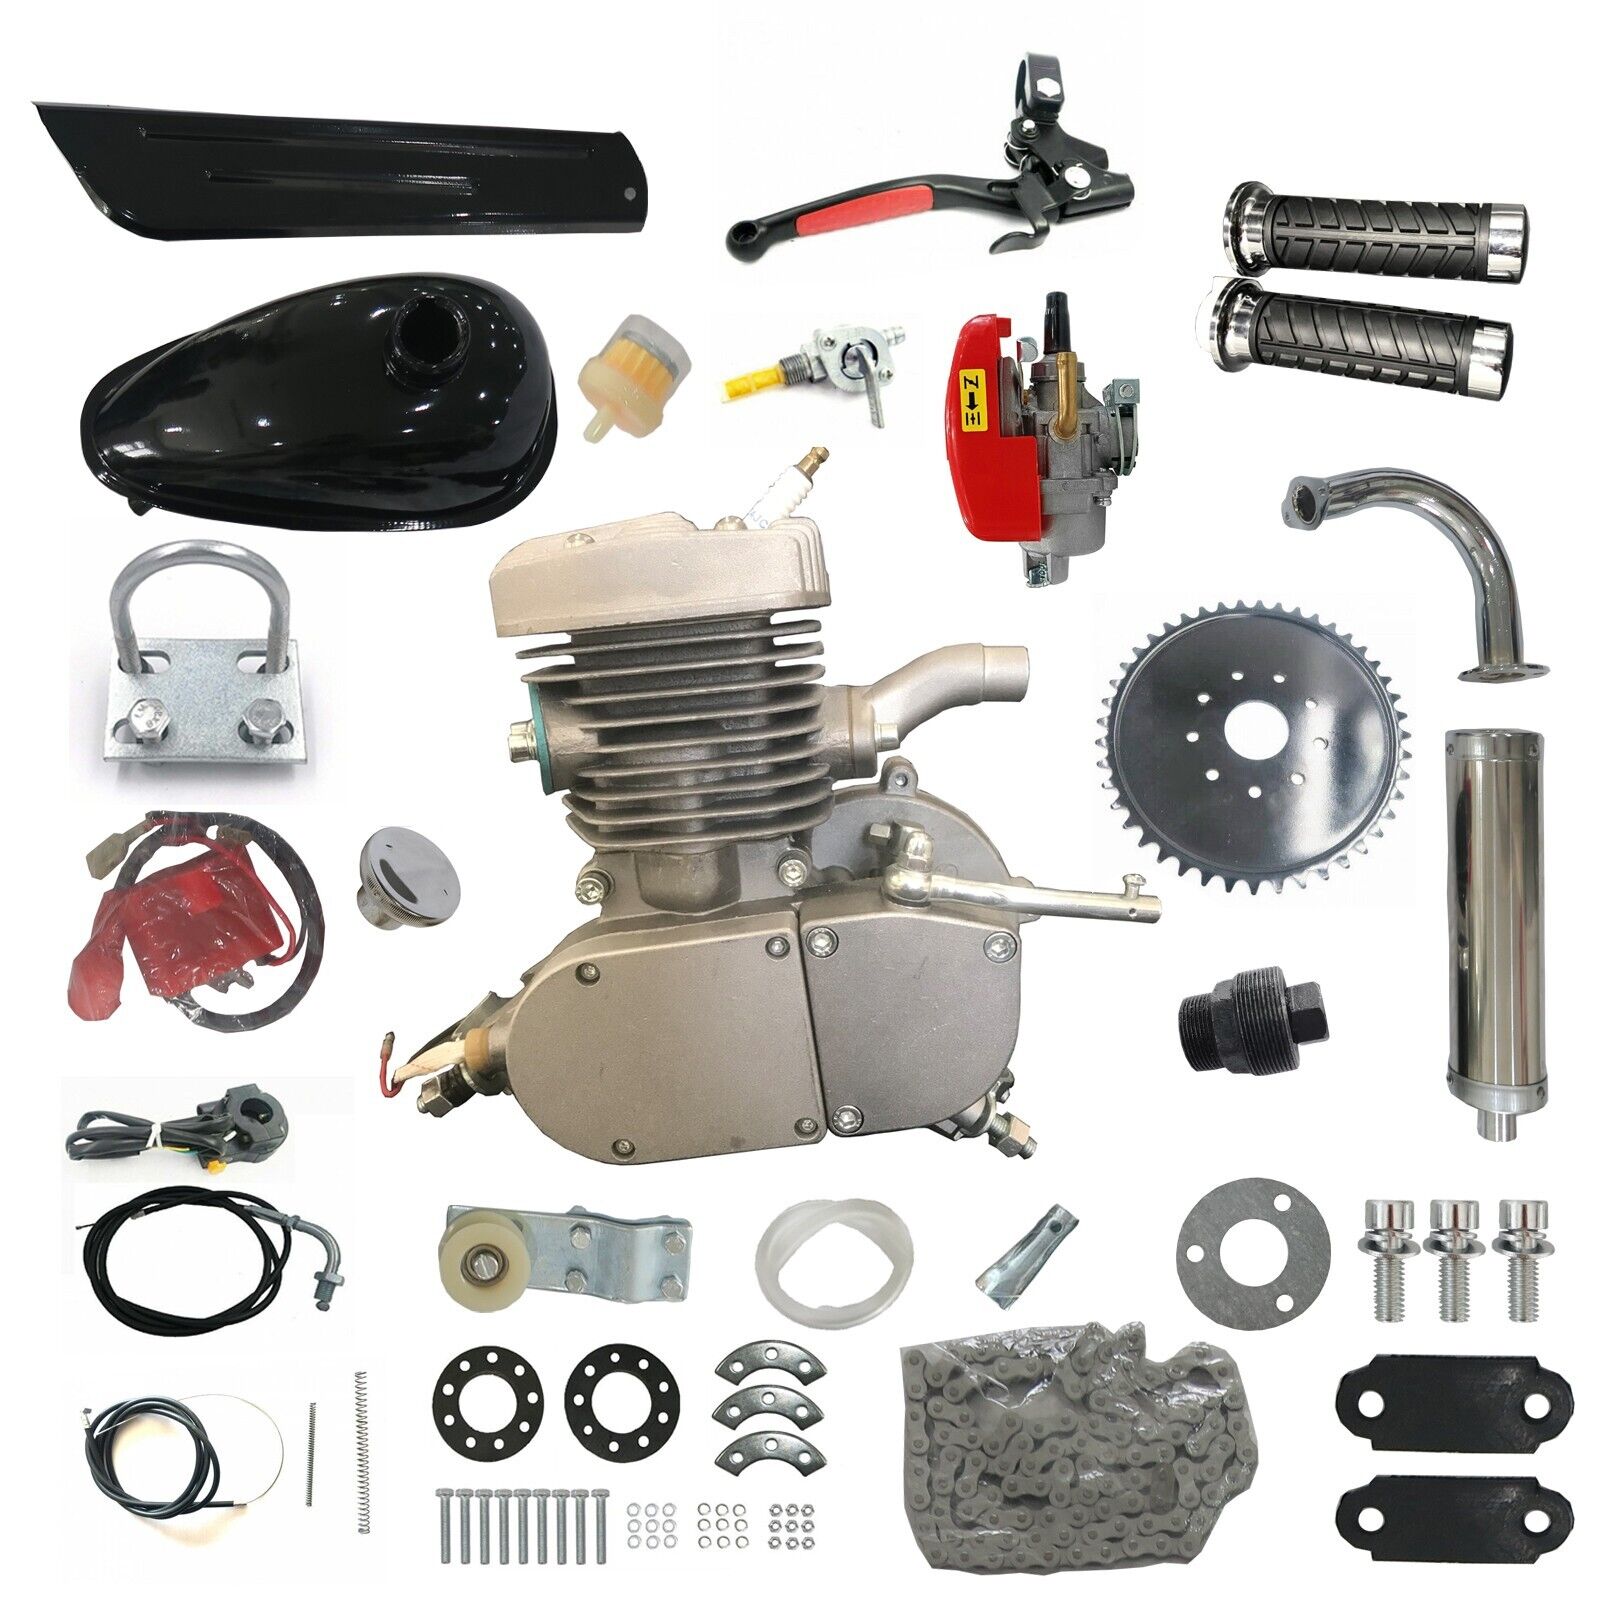 DONSP1986 YD85 Complete 52mm Bicycle Engine Kit-85cc 2 stroke Gas Motor Set